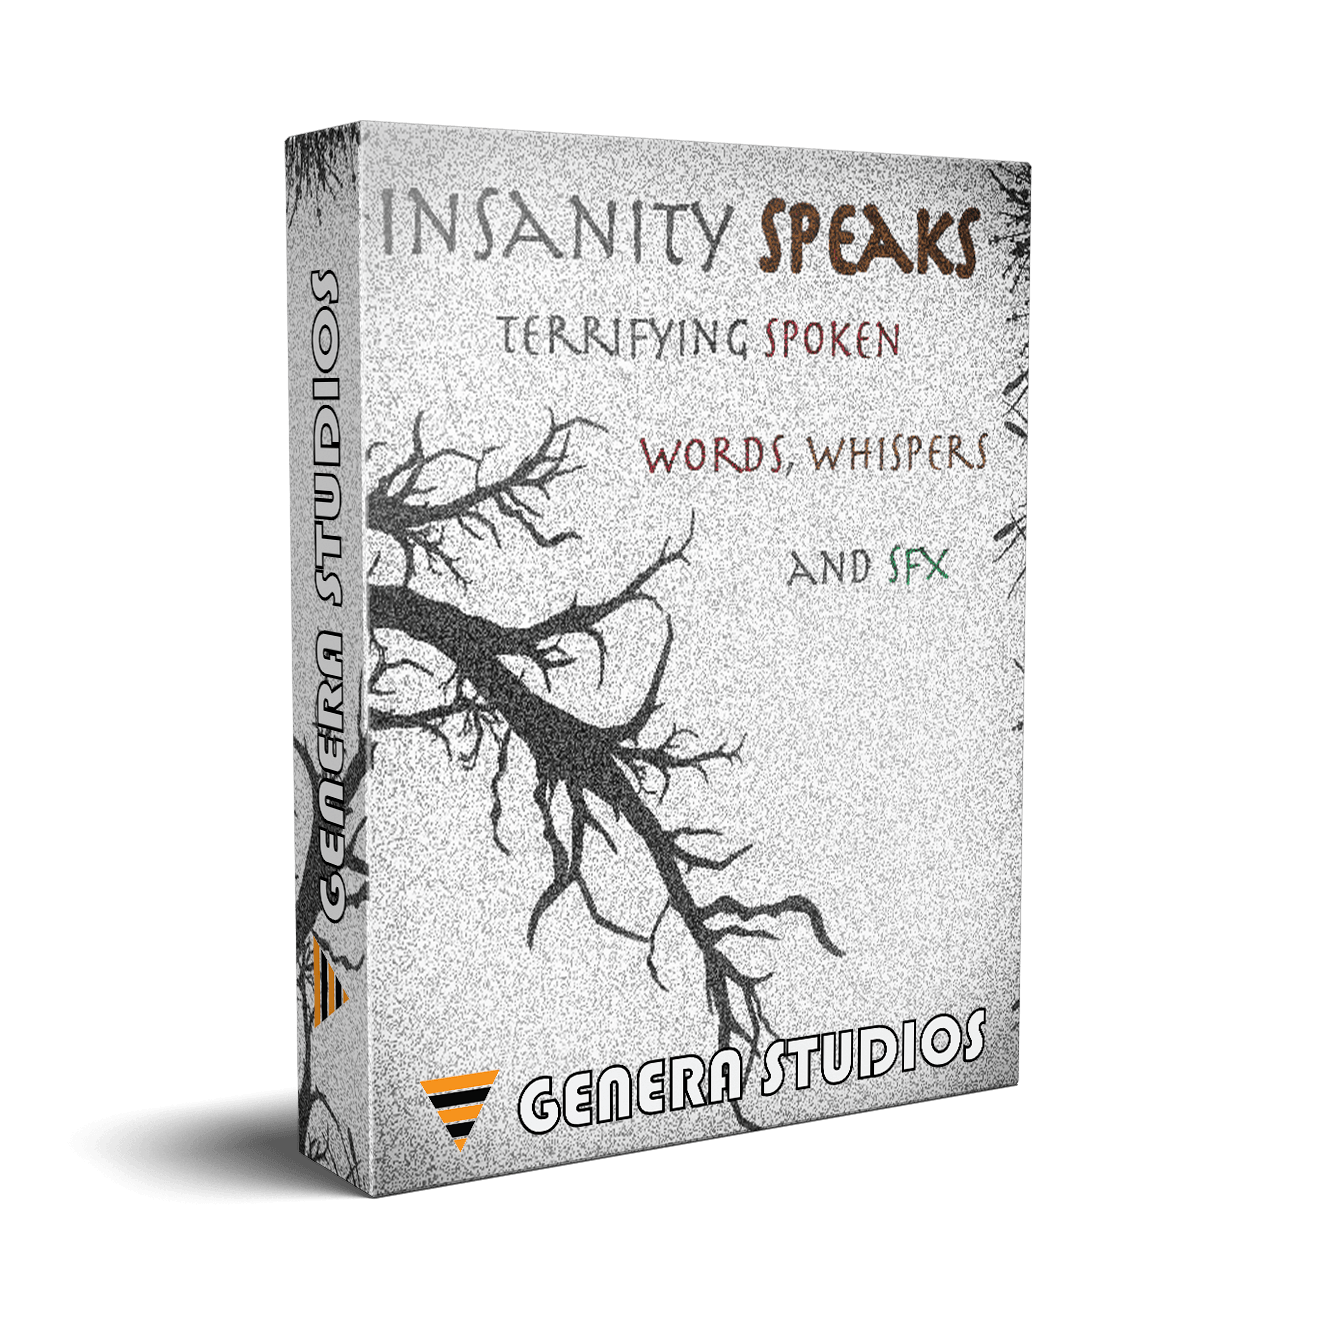 Insanity Speaks - Terrifying Spoken Words and Soundscapes